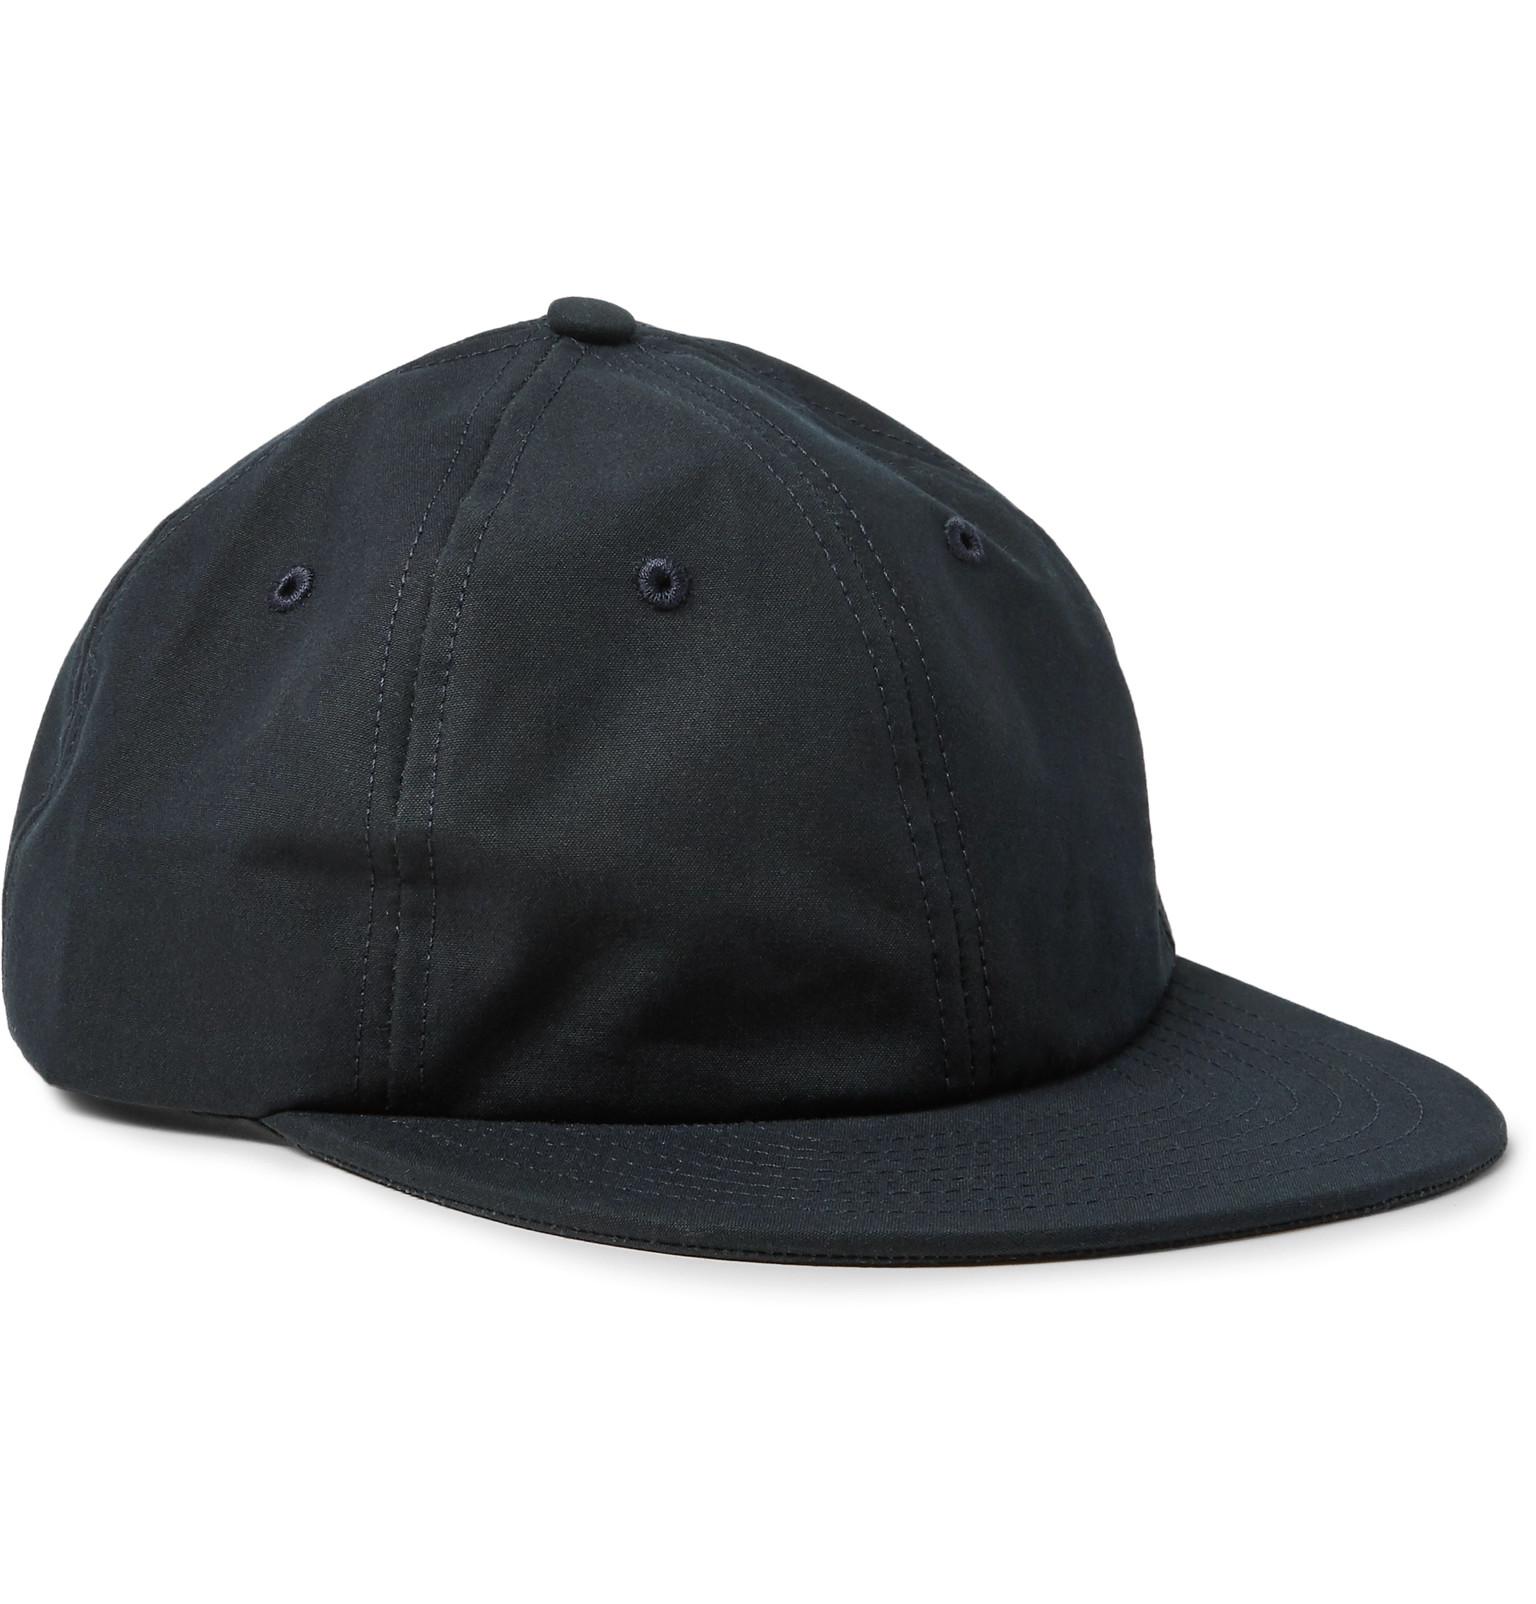 Best Made Company Water-resistant Cotton Ventile Baseball Cap in